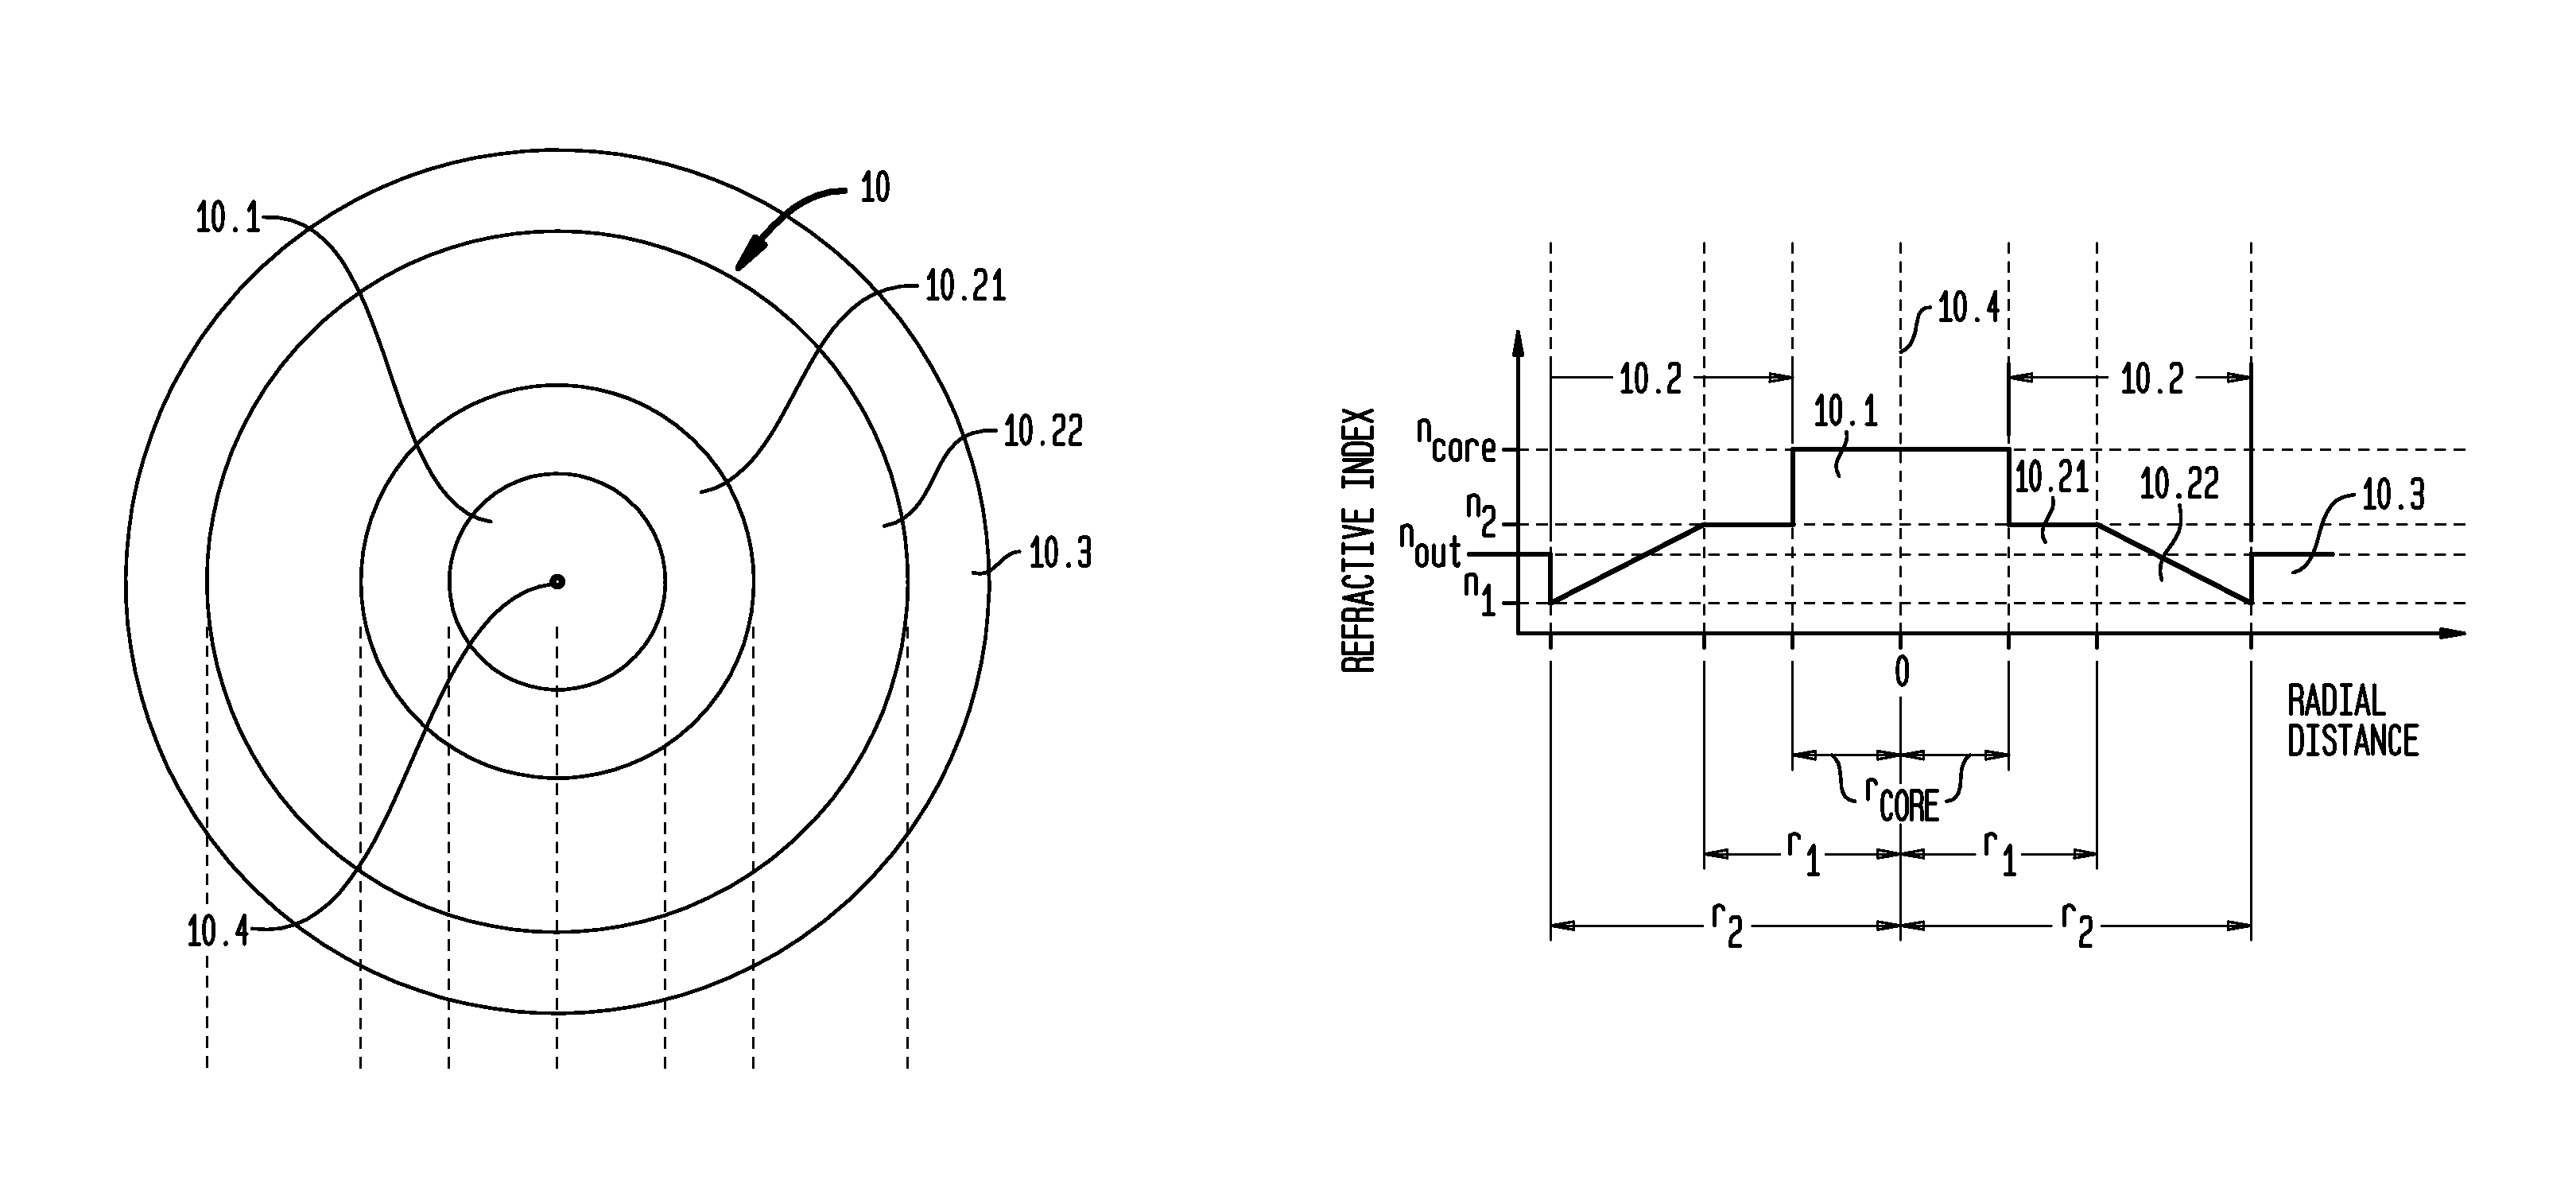 Single-mode, bend-compensated, large-mode-area optical fibers designed to accomodate simplified fabrication and tighter bends